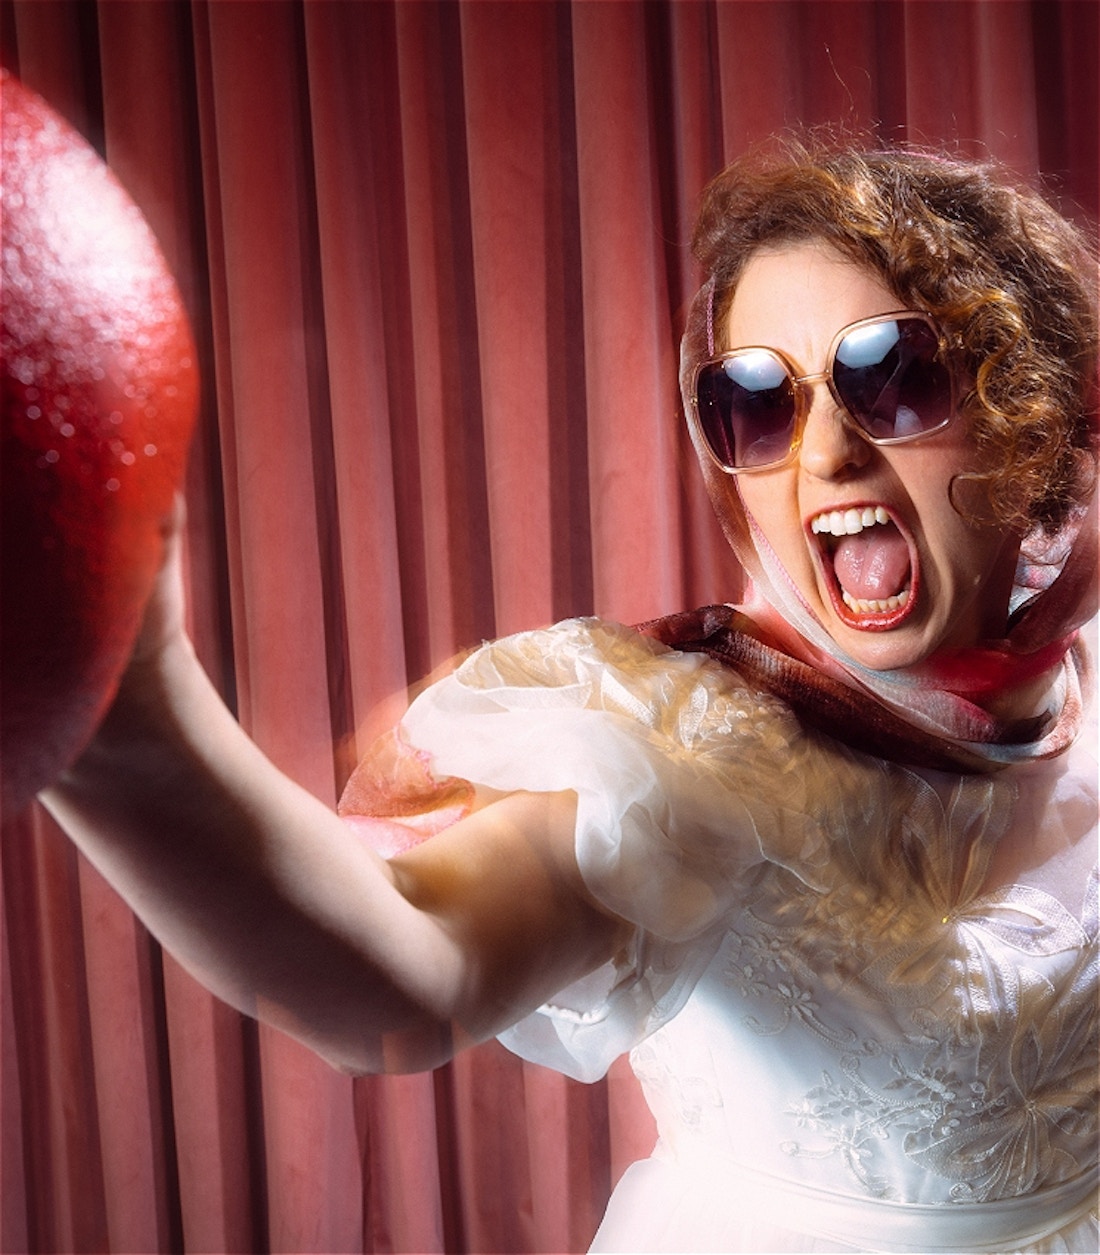 A white woman wearing a white wedding dress, a pastel pink and red head scarf, and big dark sunglasses, has her mouth wide open as if bellowing a war cry. She has her right arm extended in front of her, holding a red dodgeball, as if she is in the process of throwing it.